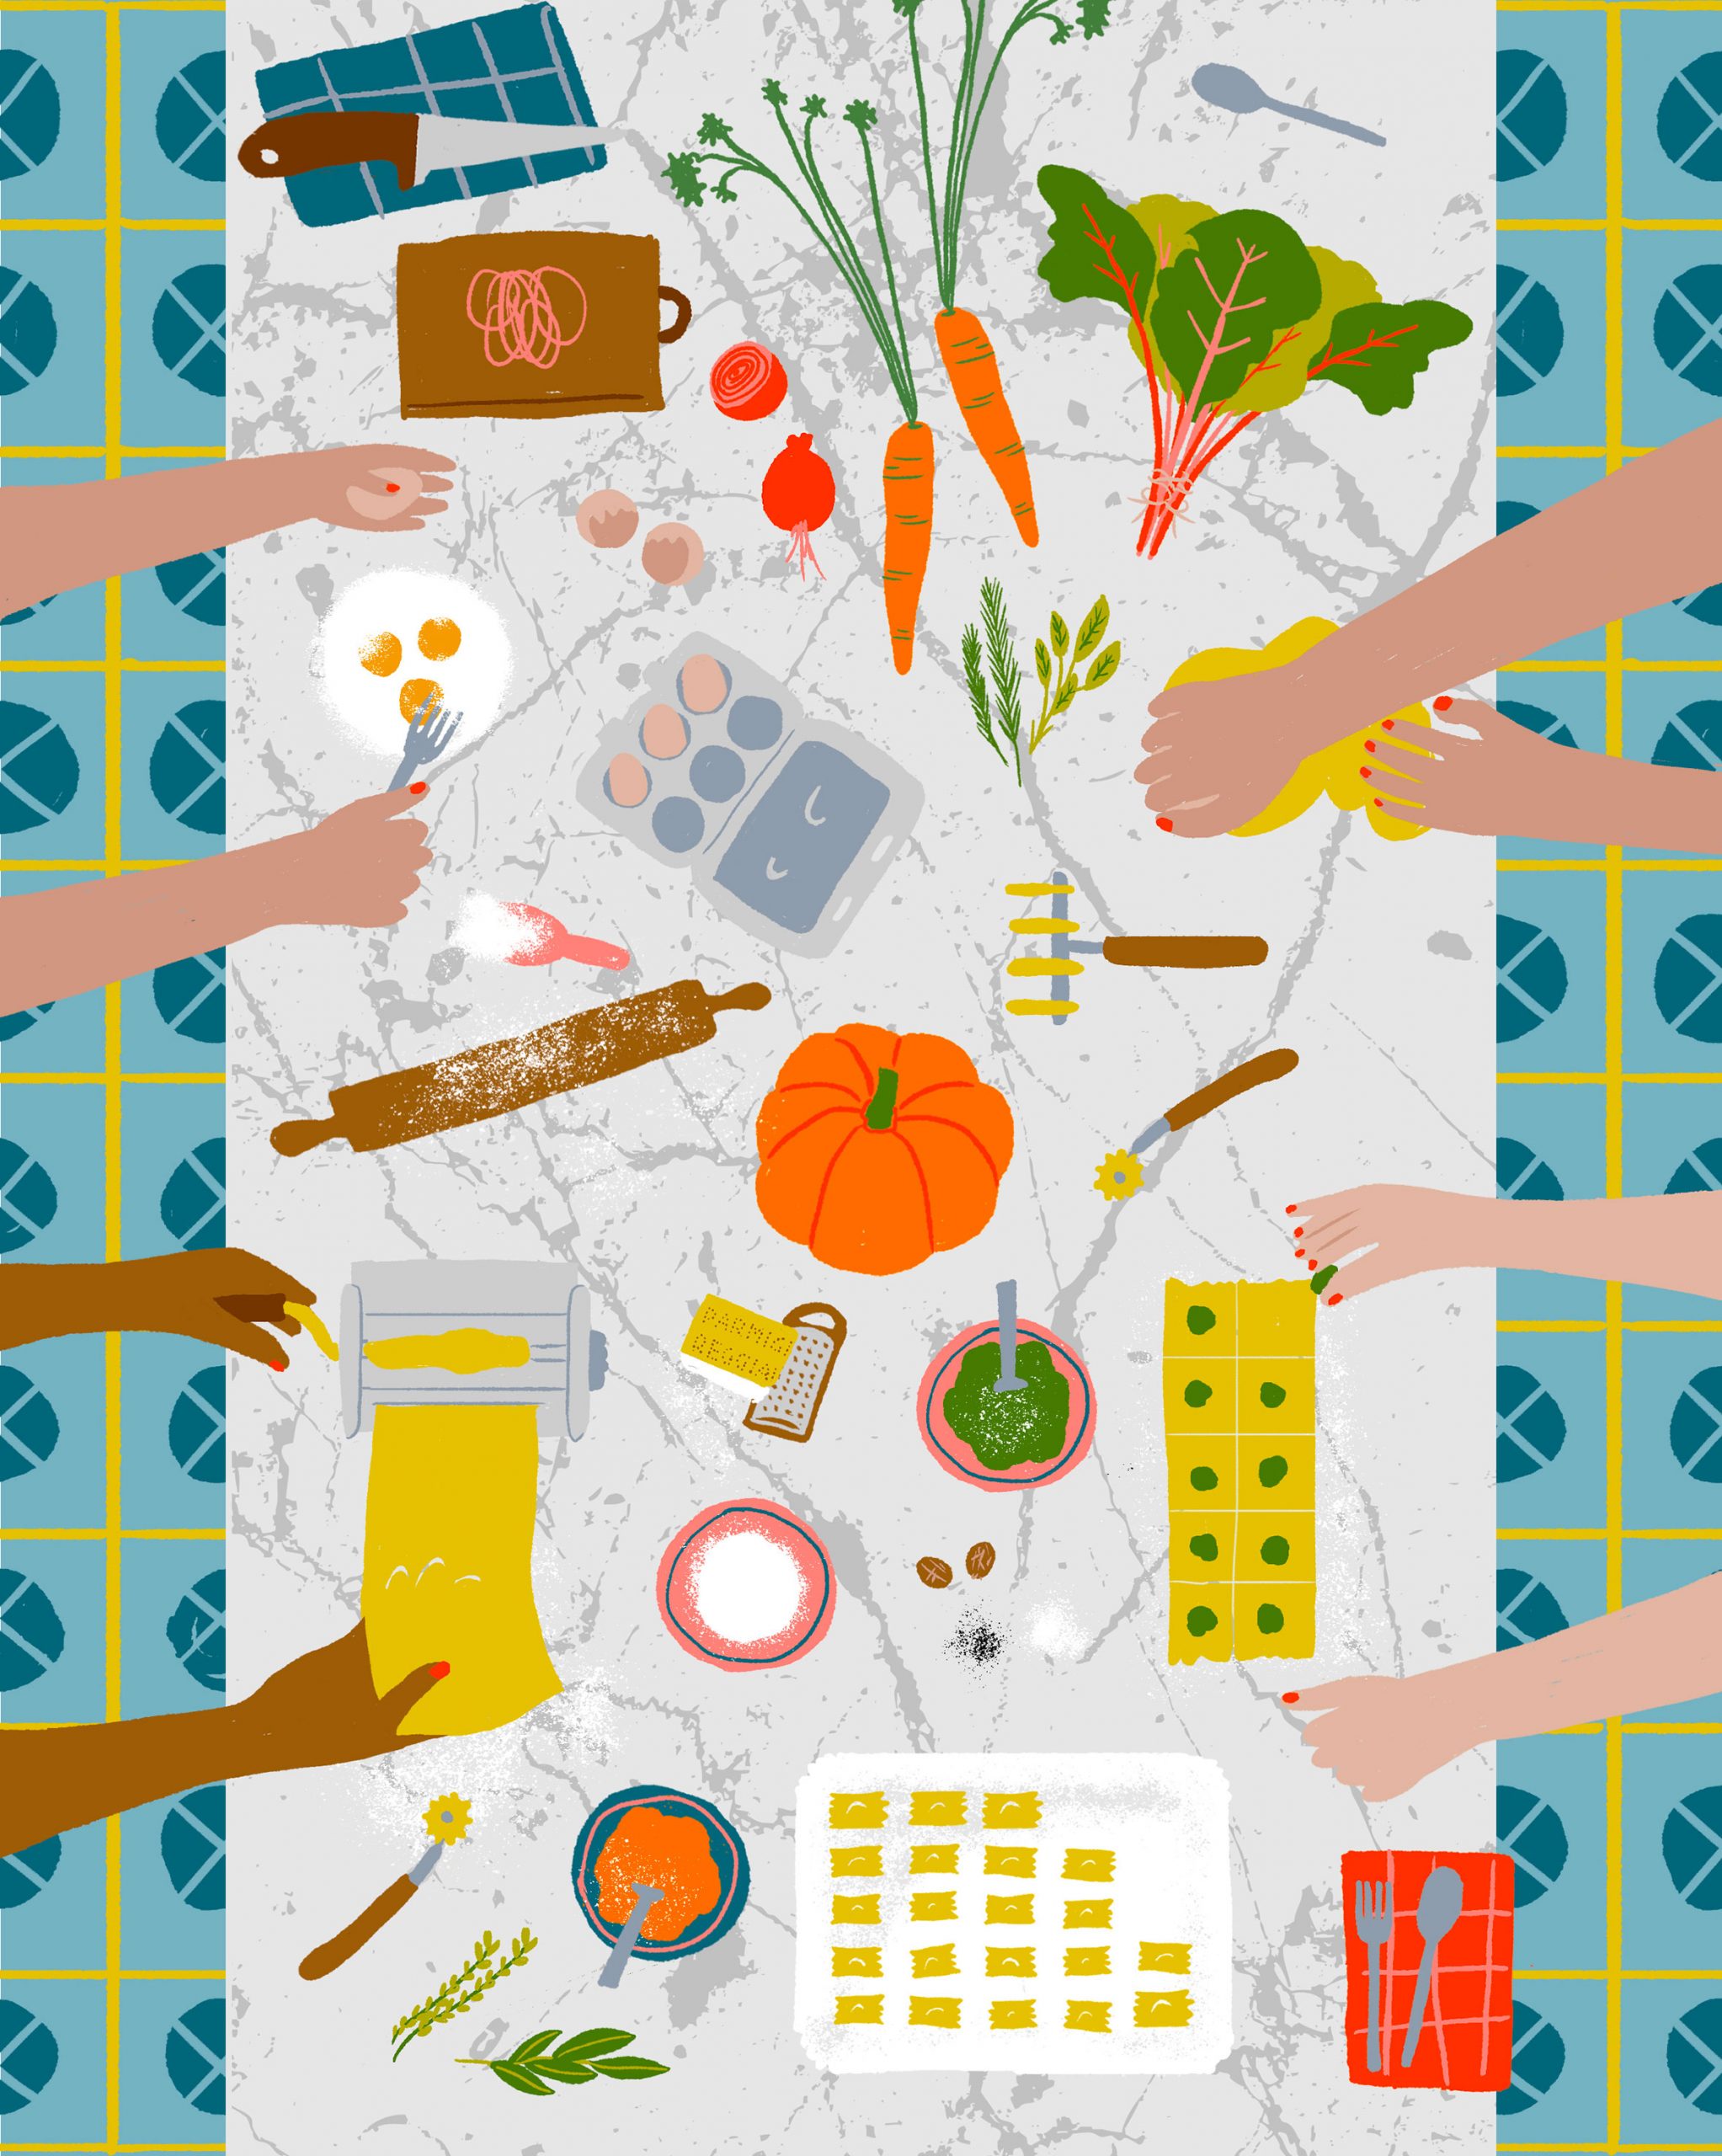 Illustration of many hands over a table preparing food.